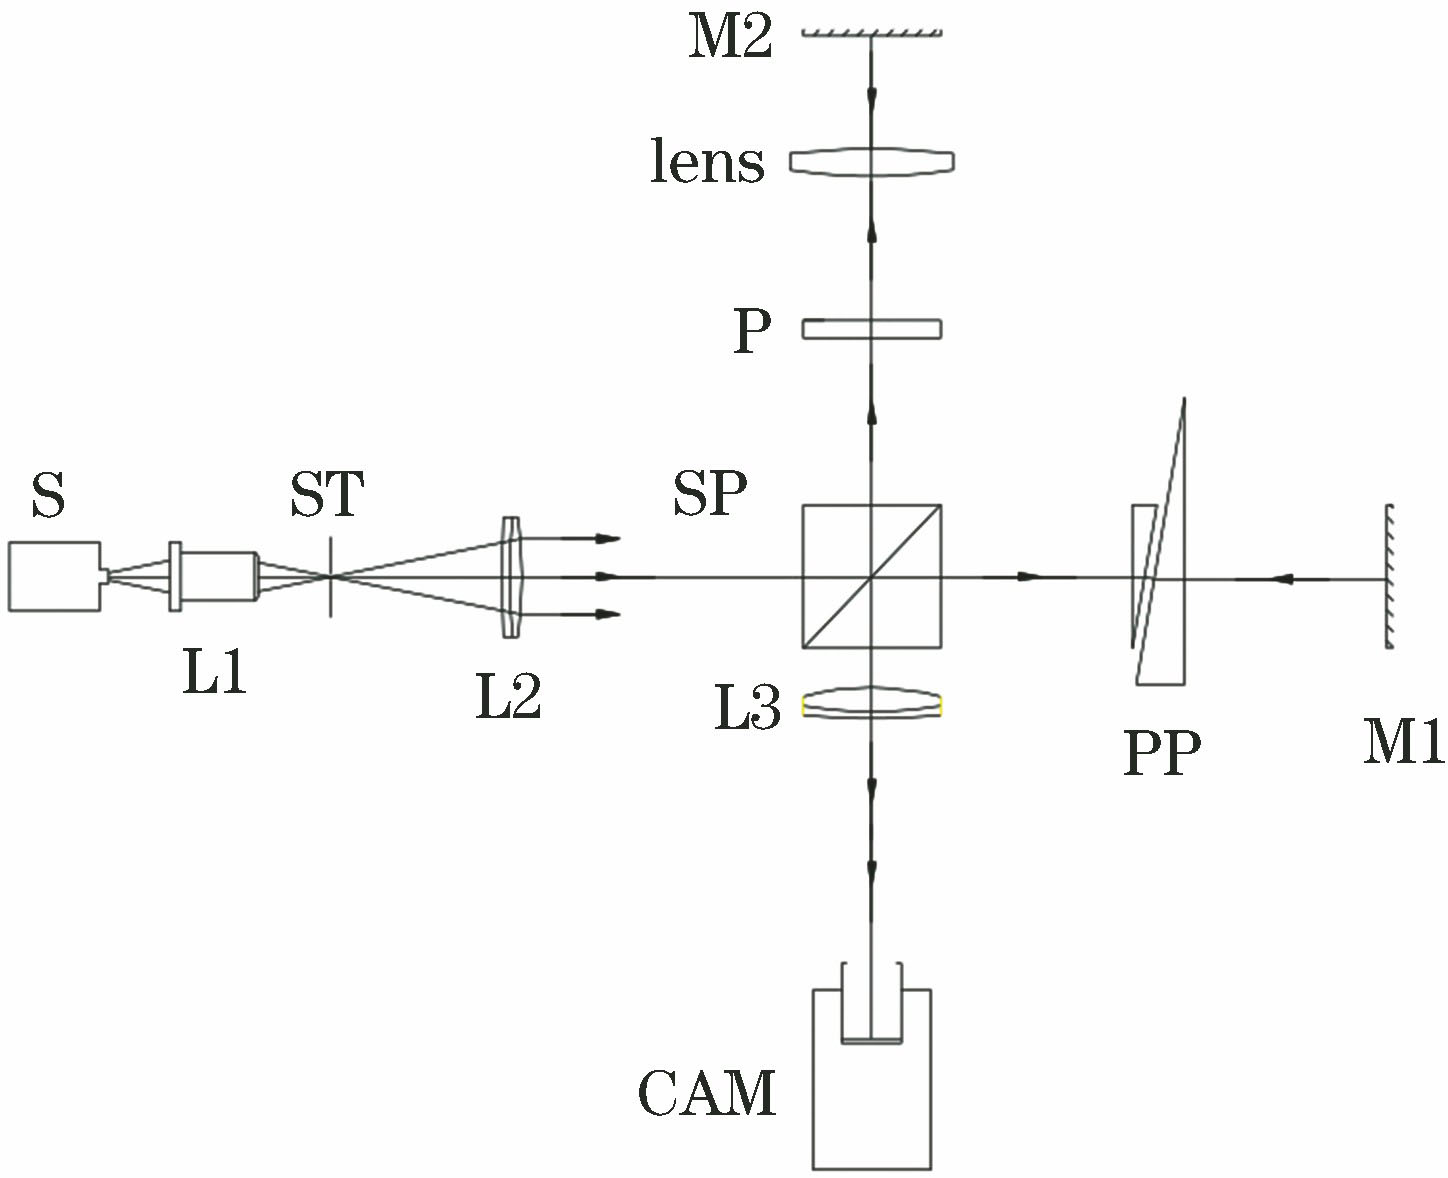 Principle diagram for measuring lens-center thickness based on low-coherence interference with transmitted illumination